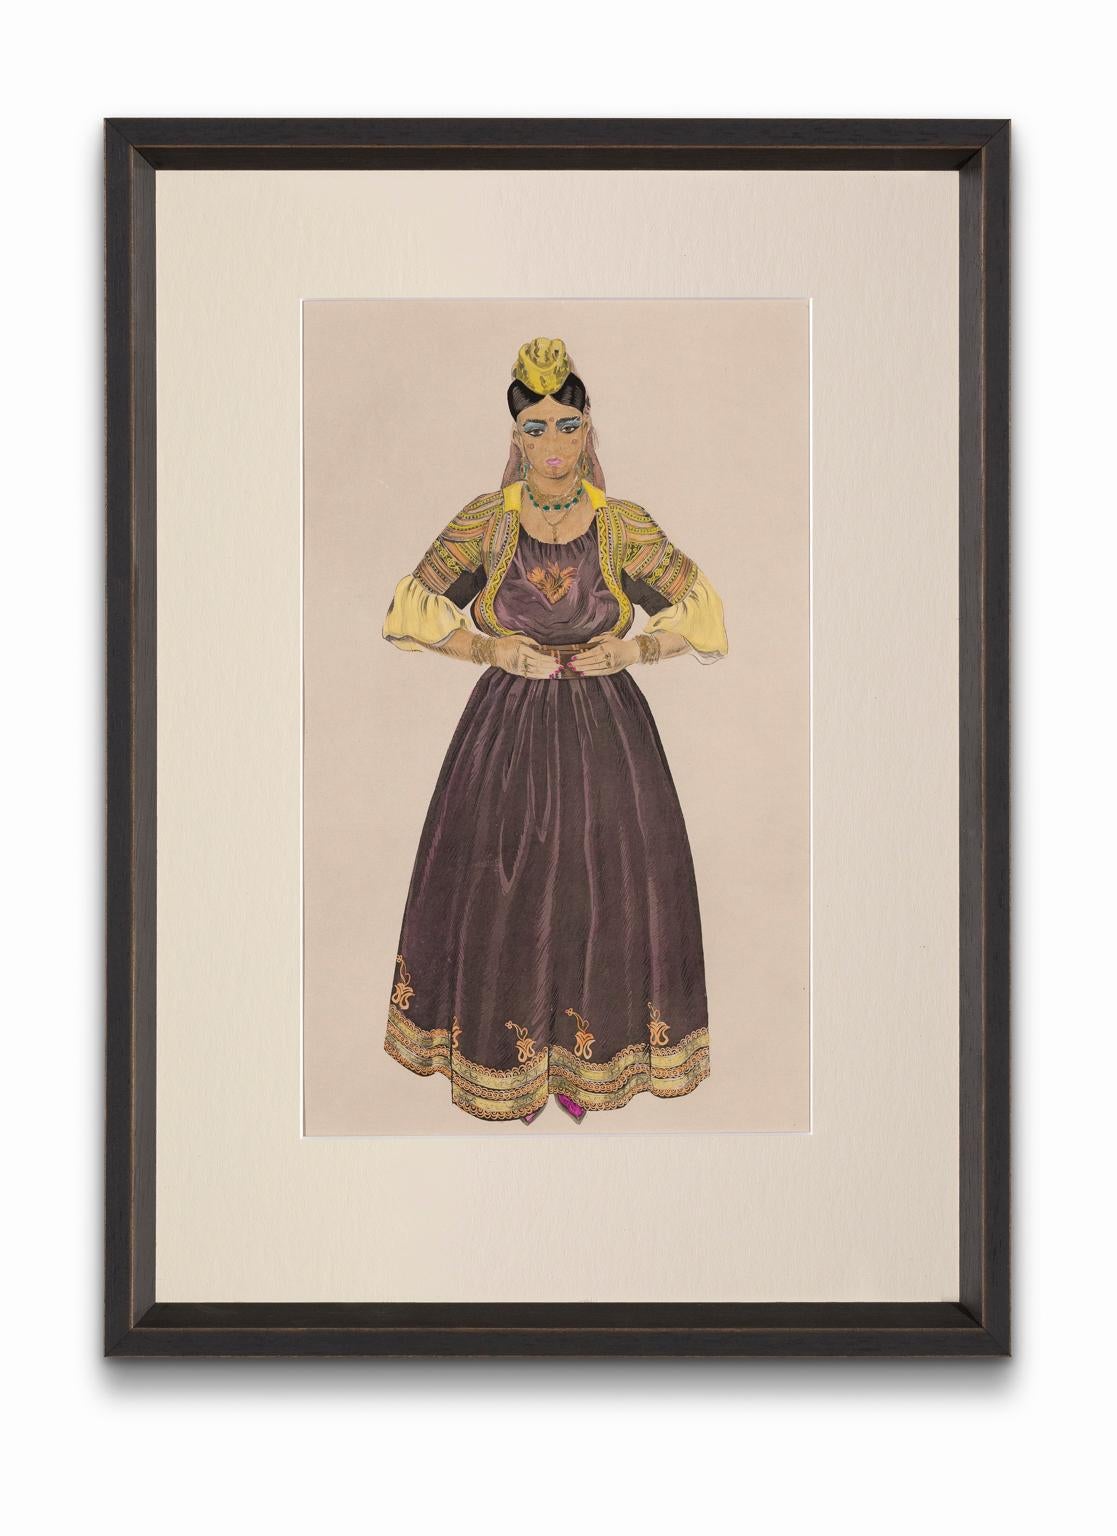 Jean Besancenot Portrait Print - "Jewish Bride of Fez" from "Costumes of Morocco", Gouache on Paper